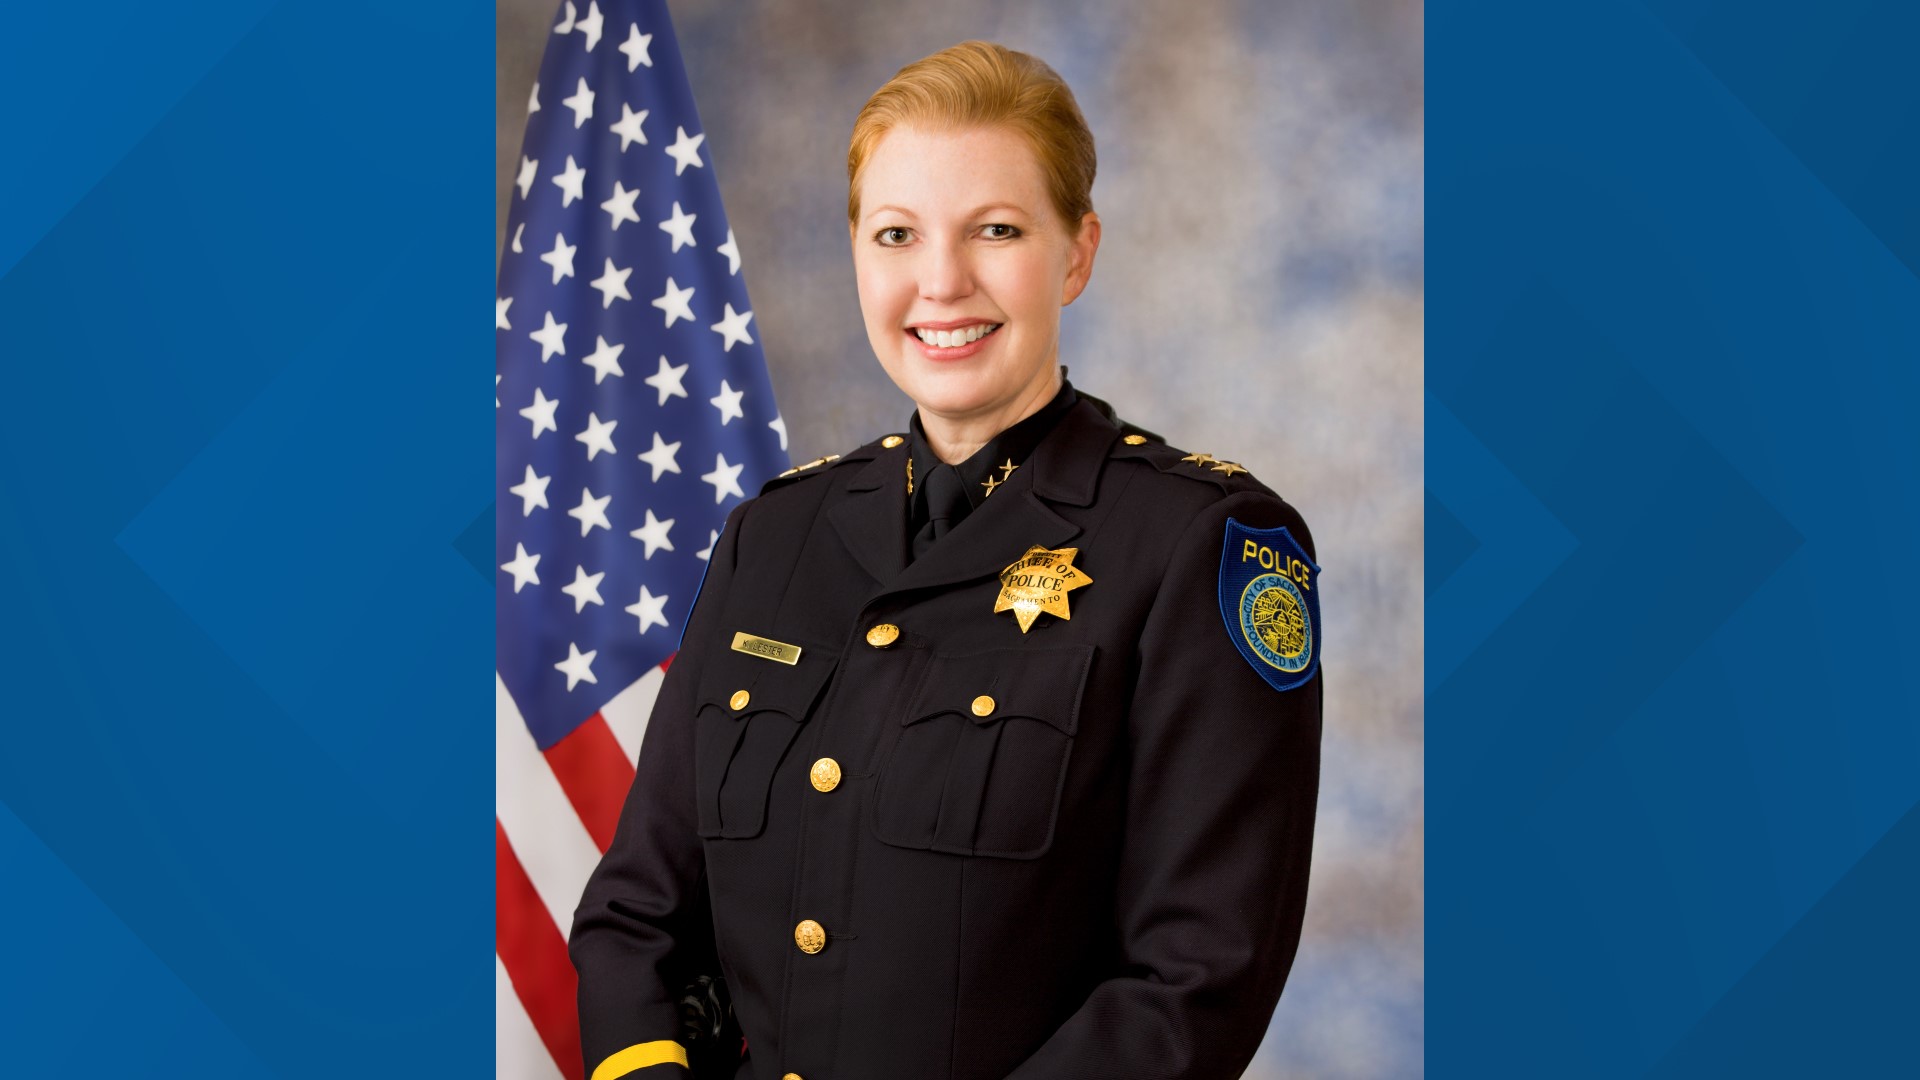 The City of Sacramento selected Kathy Lester to become its next Chief of Police. She is a 27-year veteran of the department.